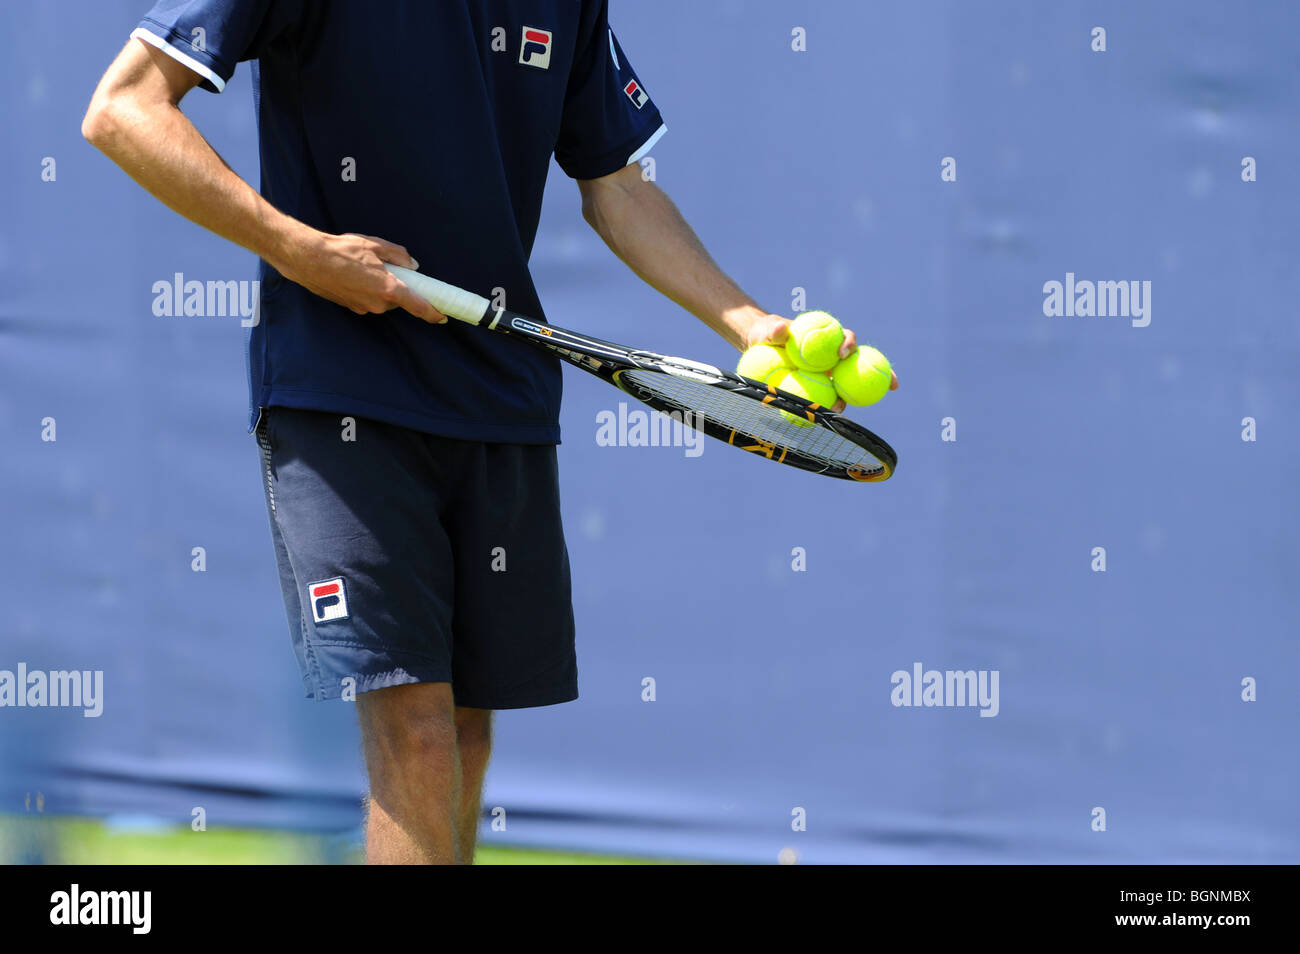 A tennis player tests the balls before serving Stock Photo